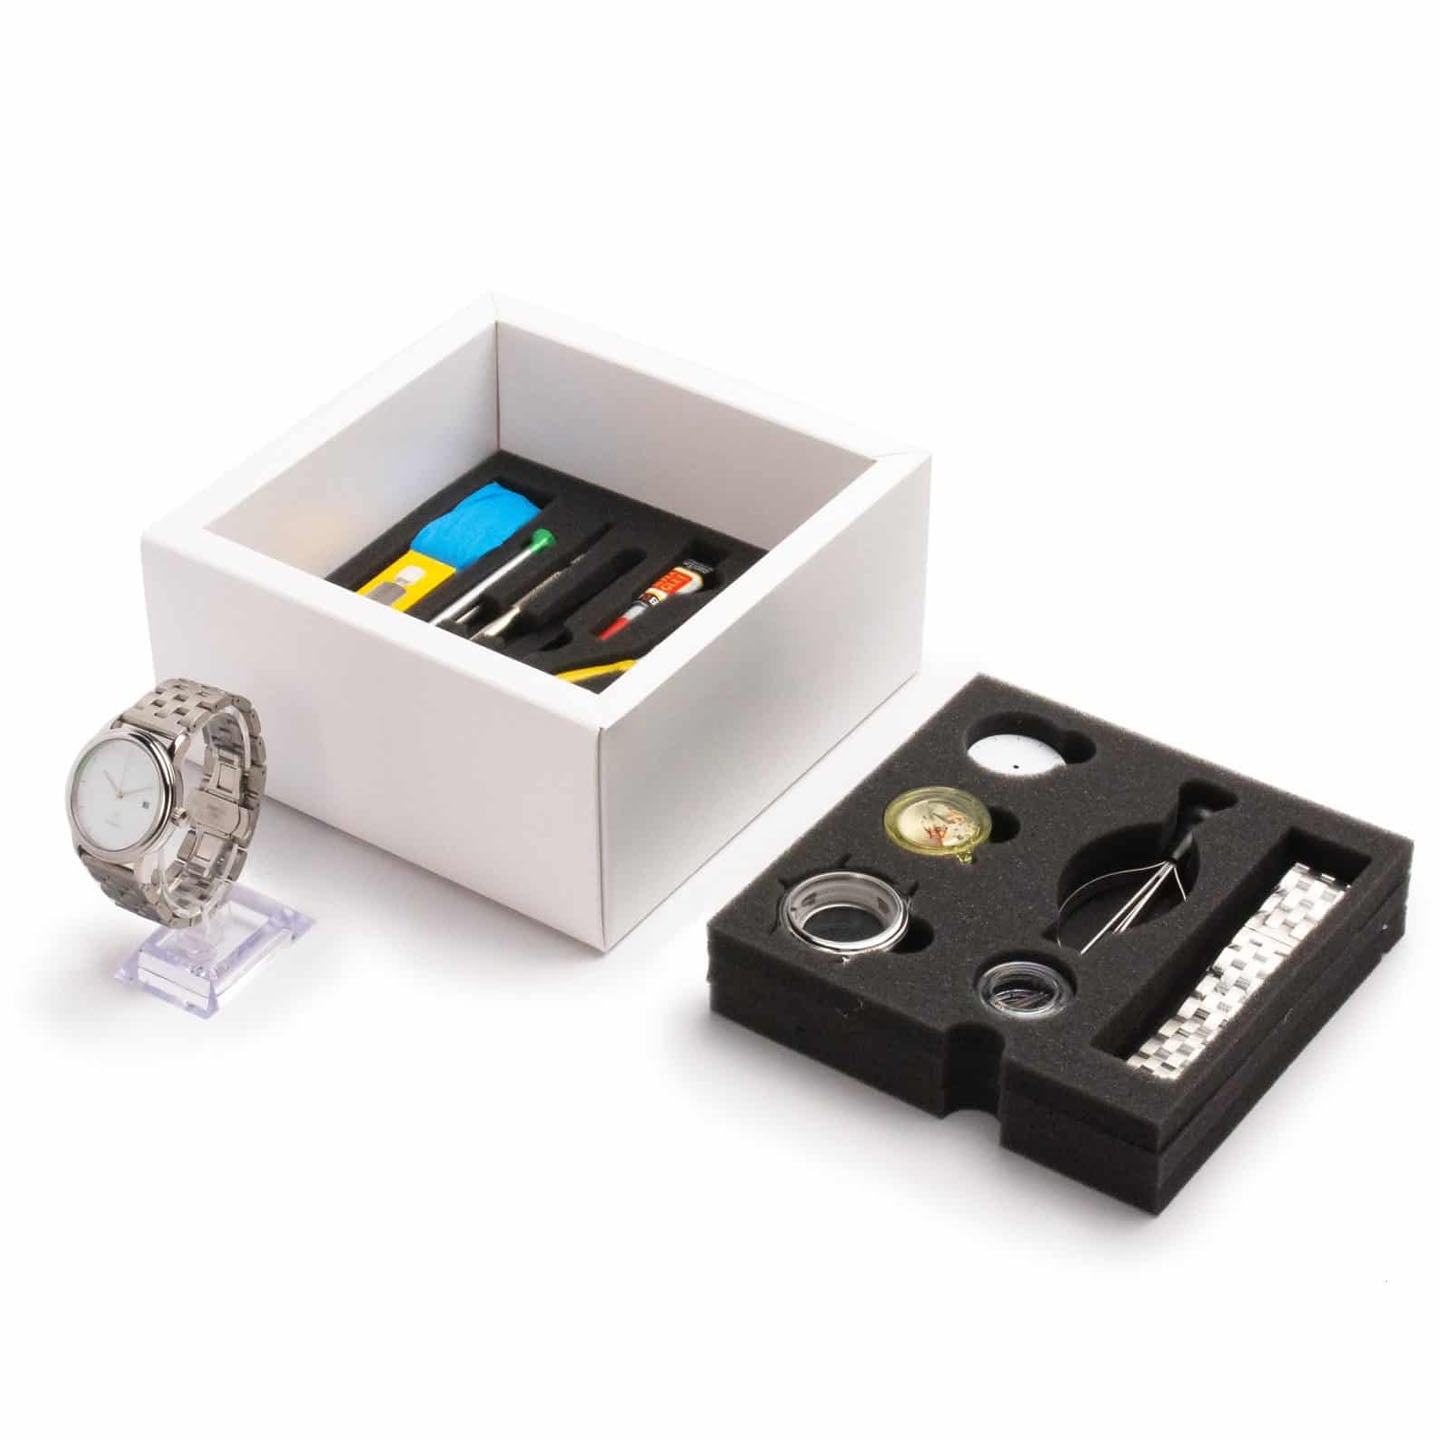 Build Your Own Mechanical Watch Kit